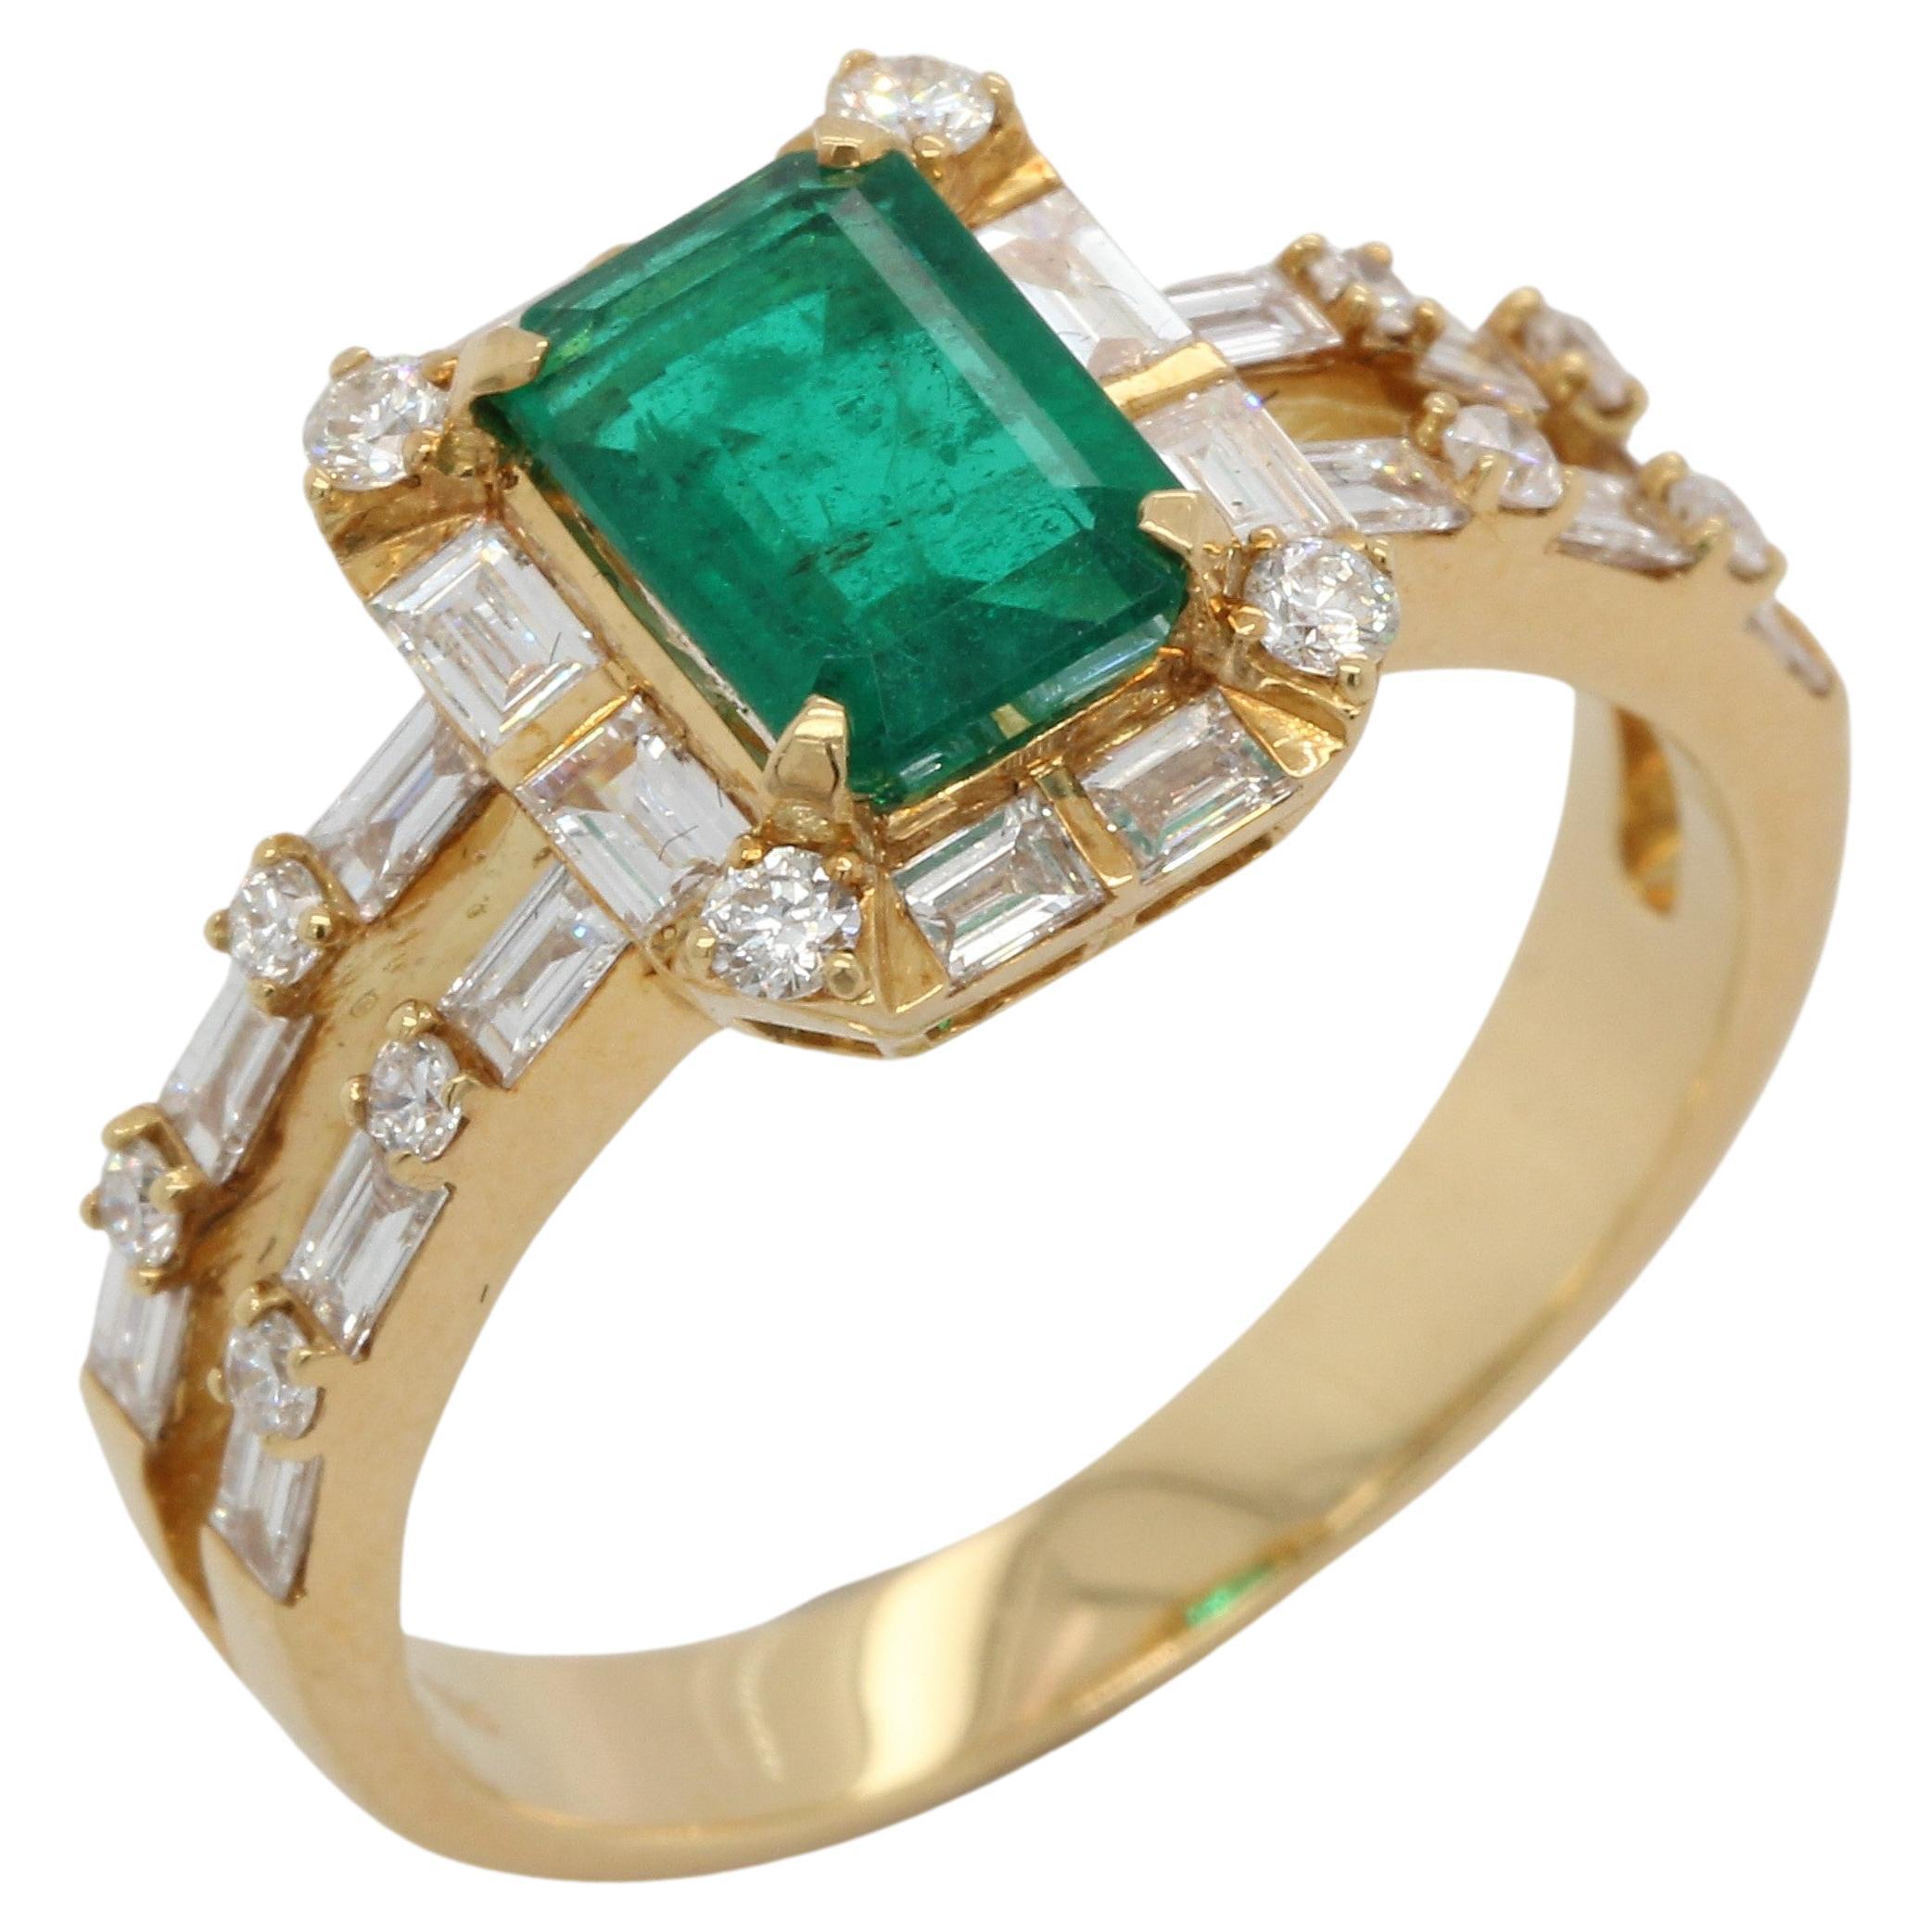 1.04 Carat Emerald and Diamond Solitaire Ring in 18 Karat Gold